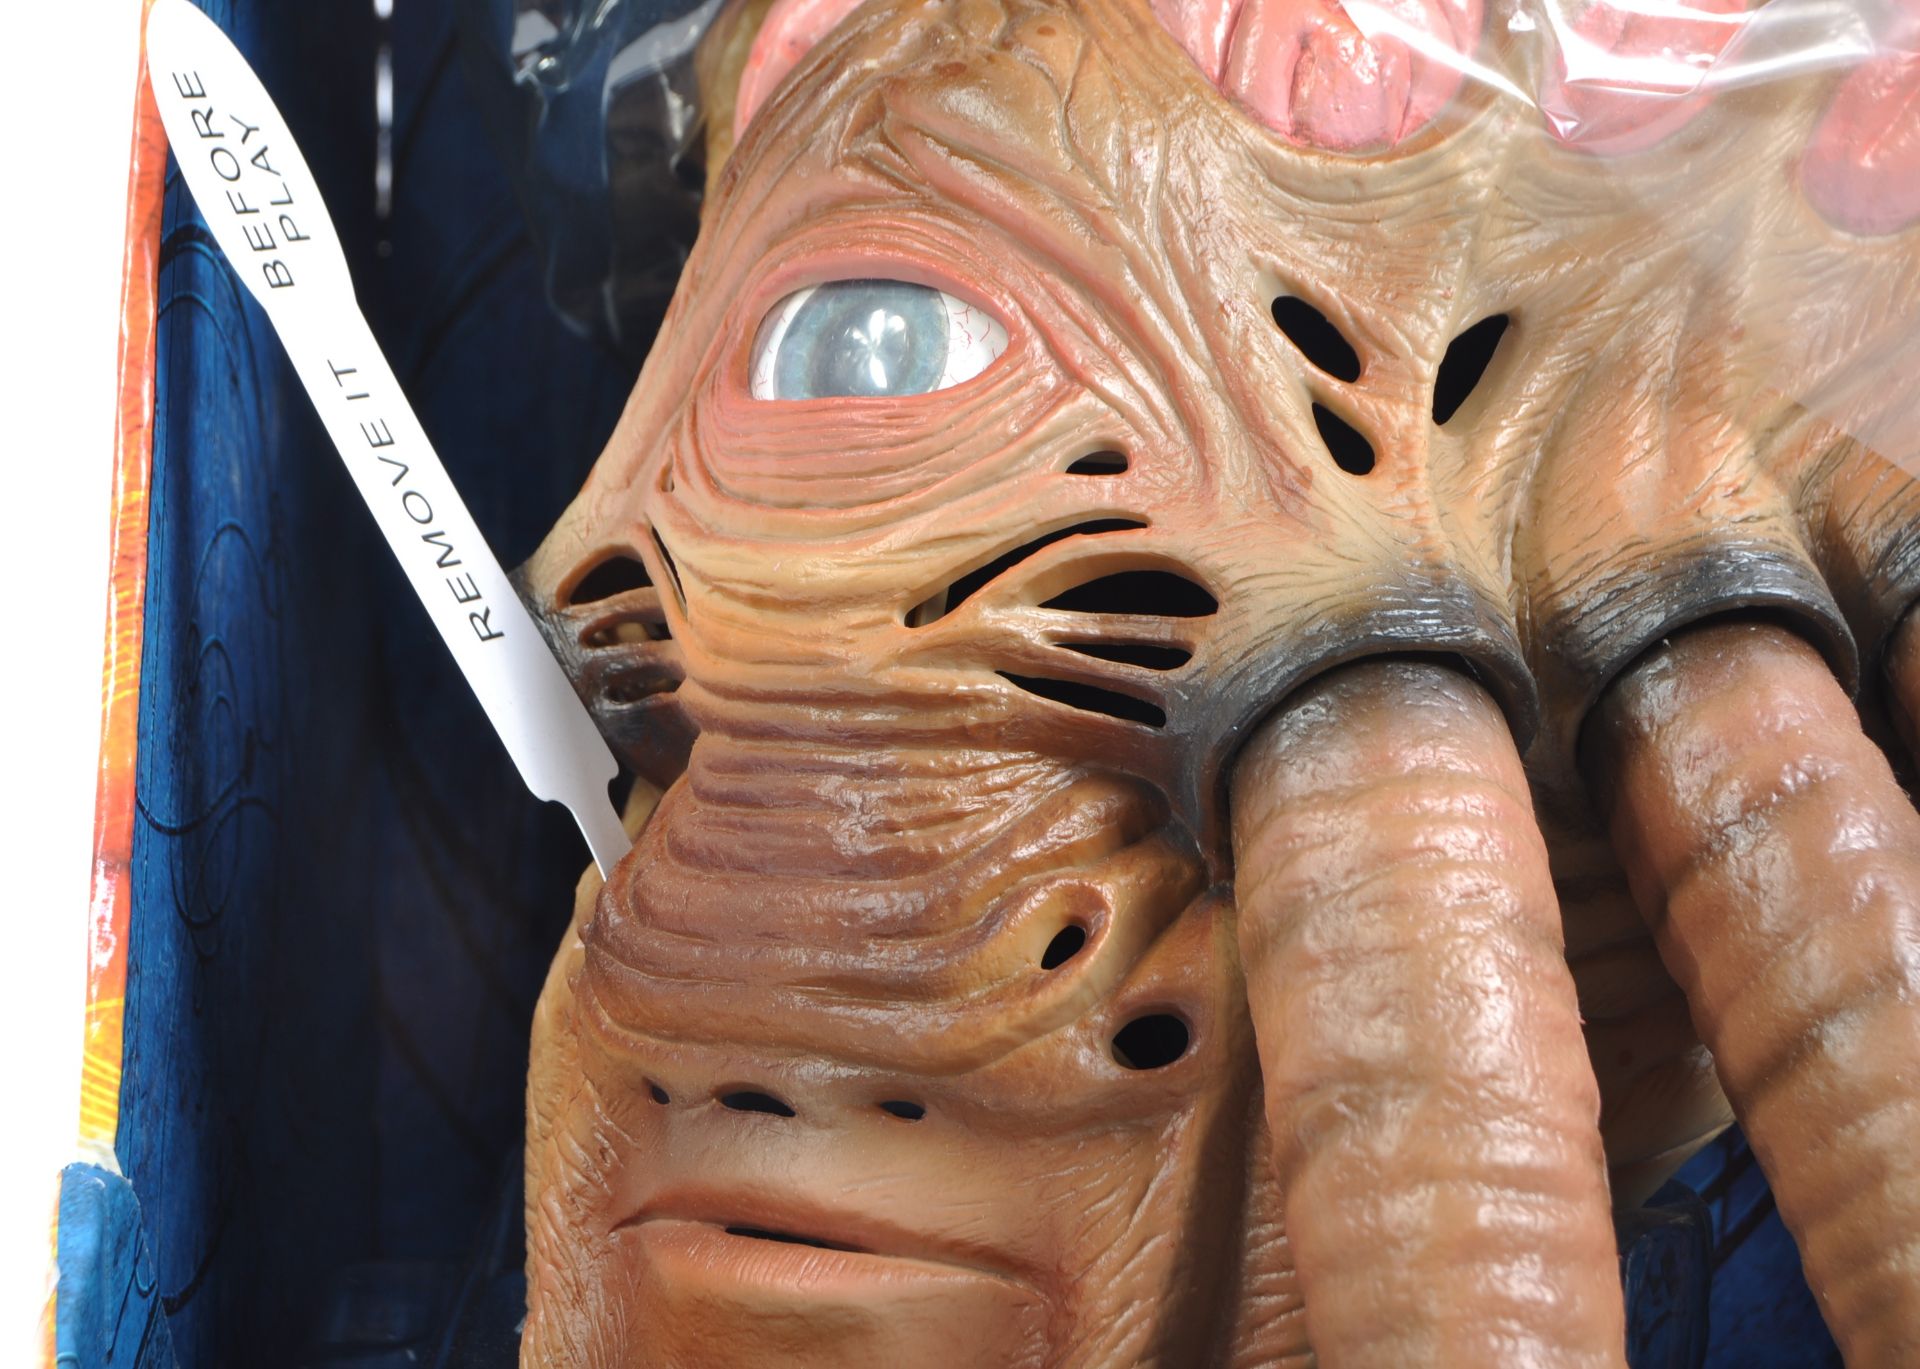 DOCTOR WHO - CHARACTER OPTIONS - DALEK SEC VOICE CHANGE MASK - Image 2 of 4